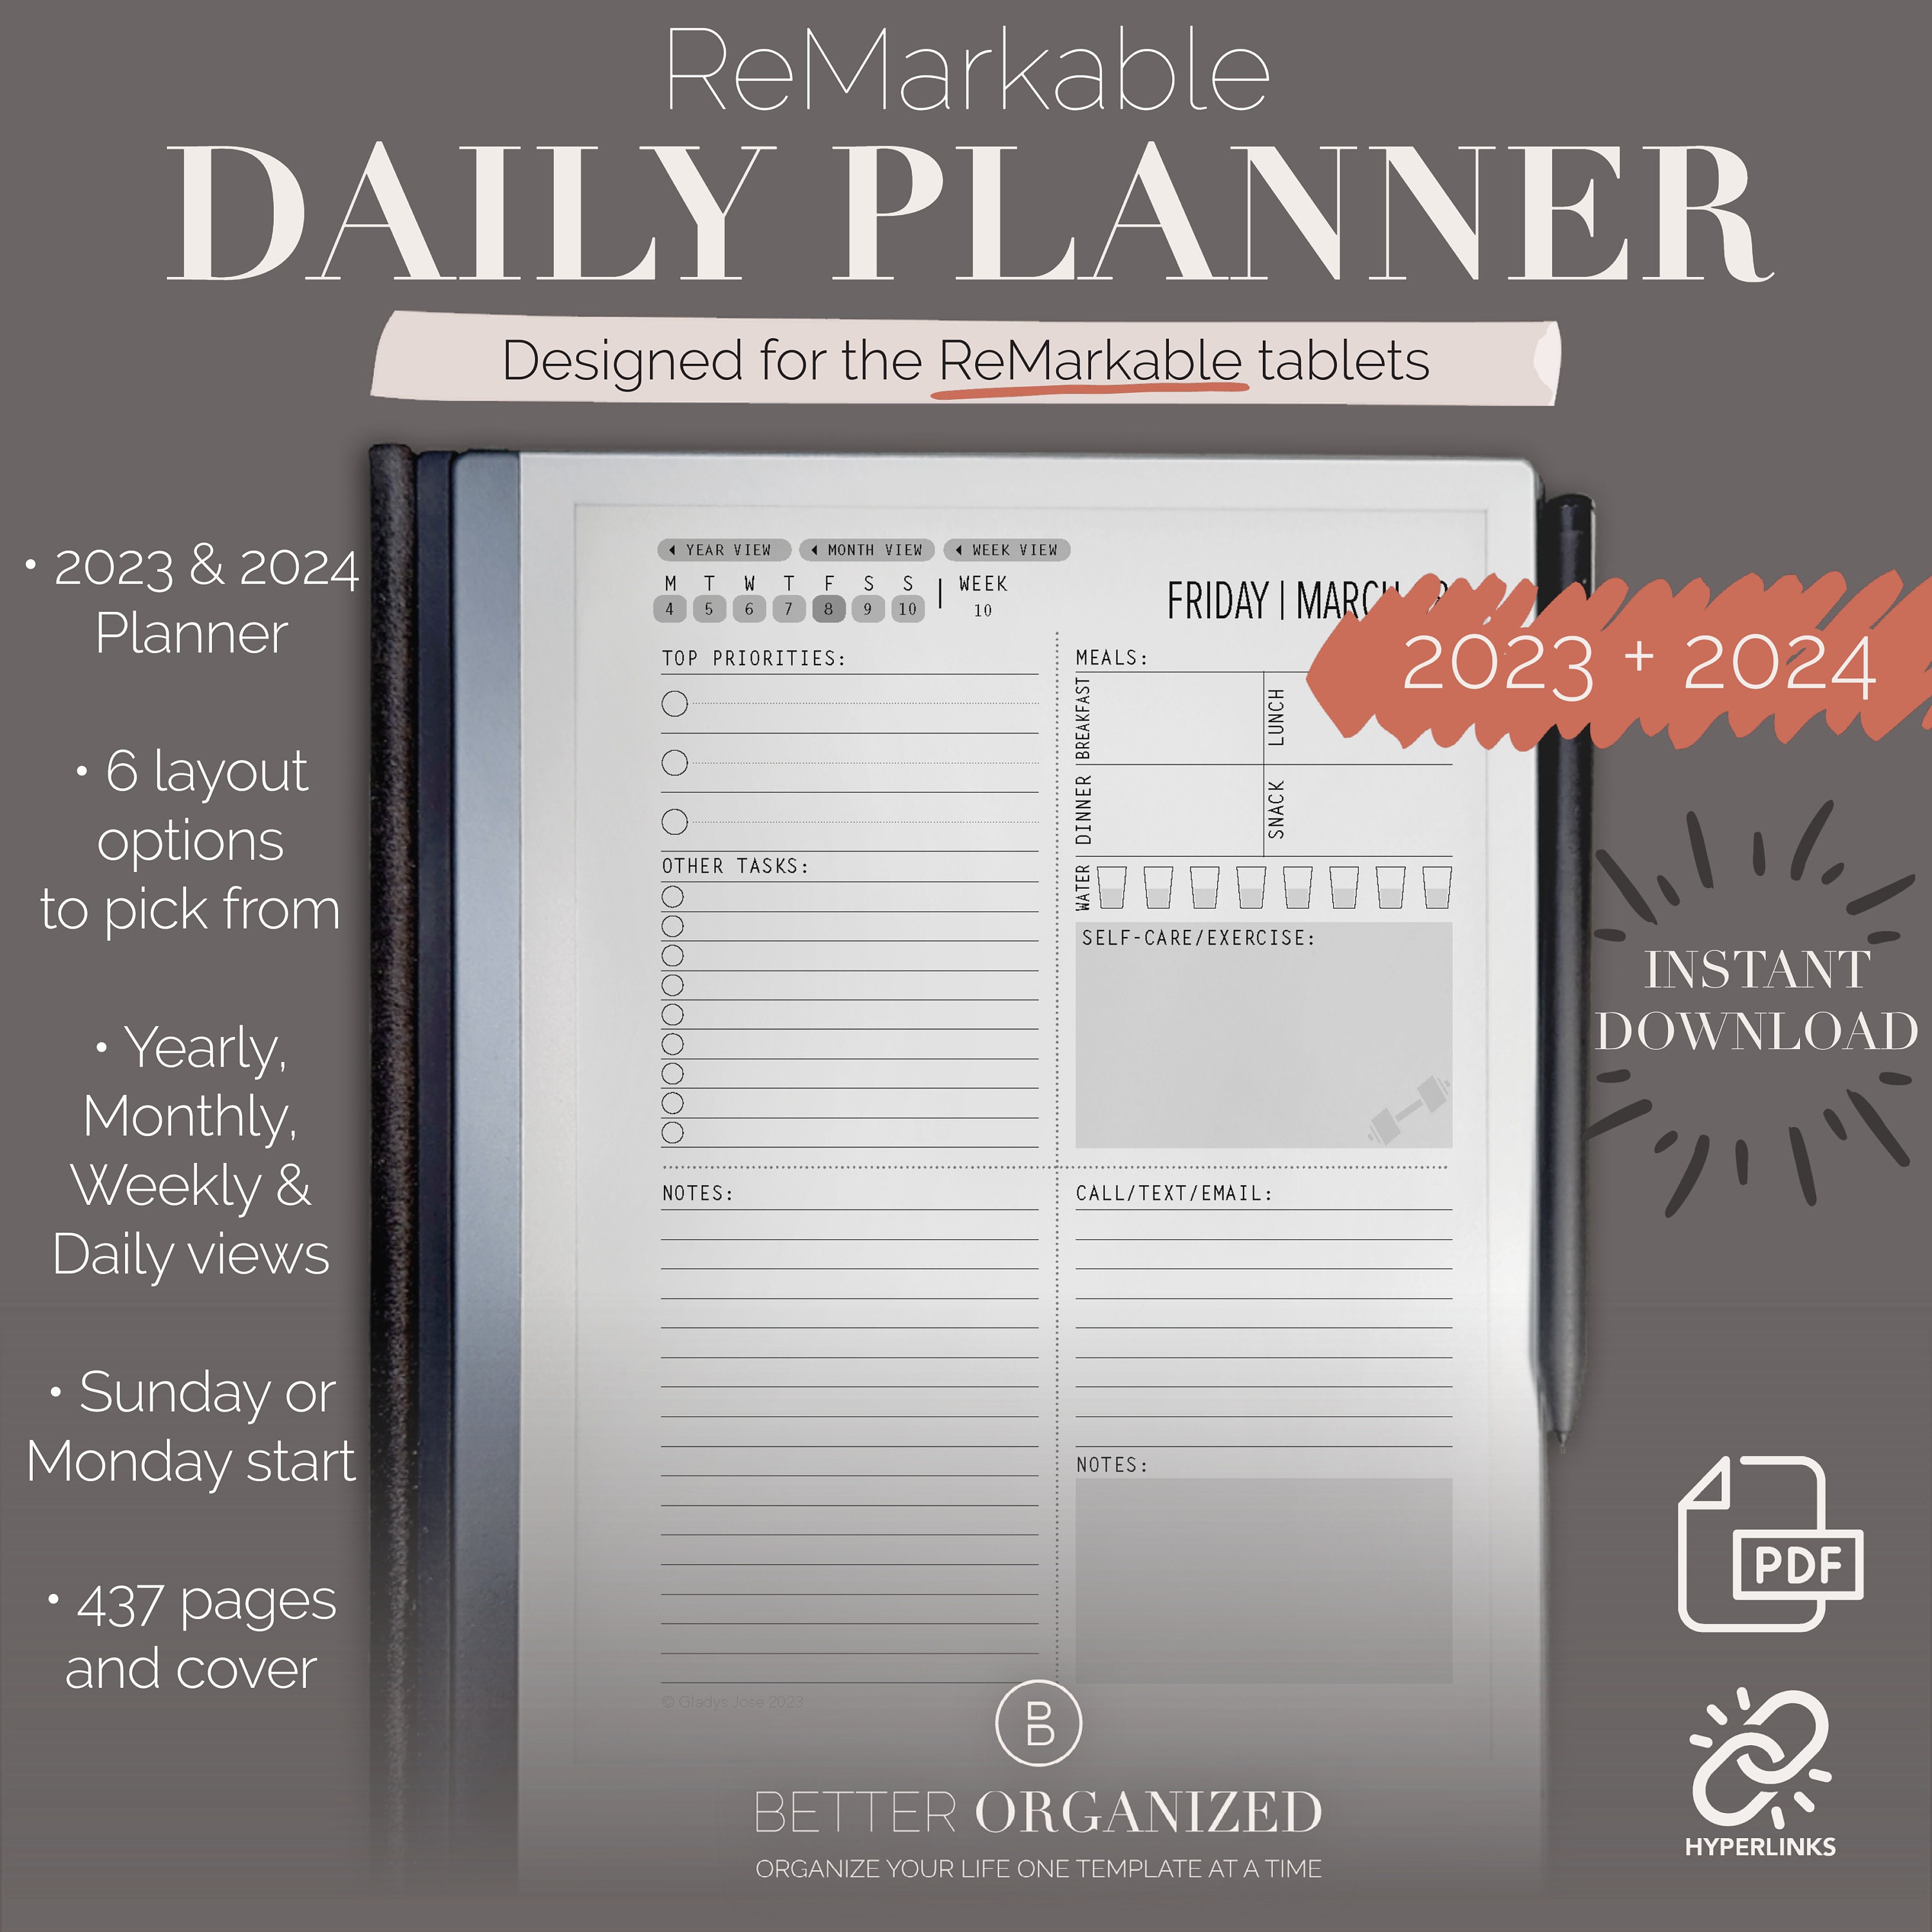 Remarkable 2 Daily Planner Standard Edition, 2024, 2025, Remarkable  Templates, Calendar 